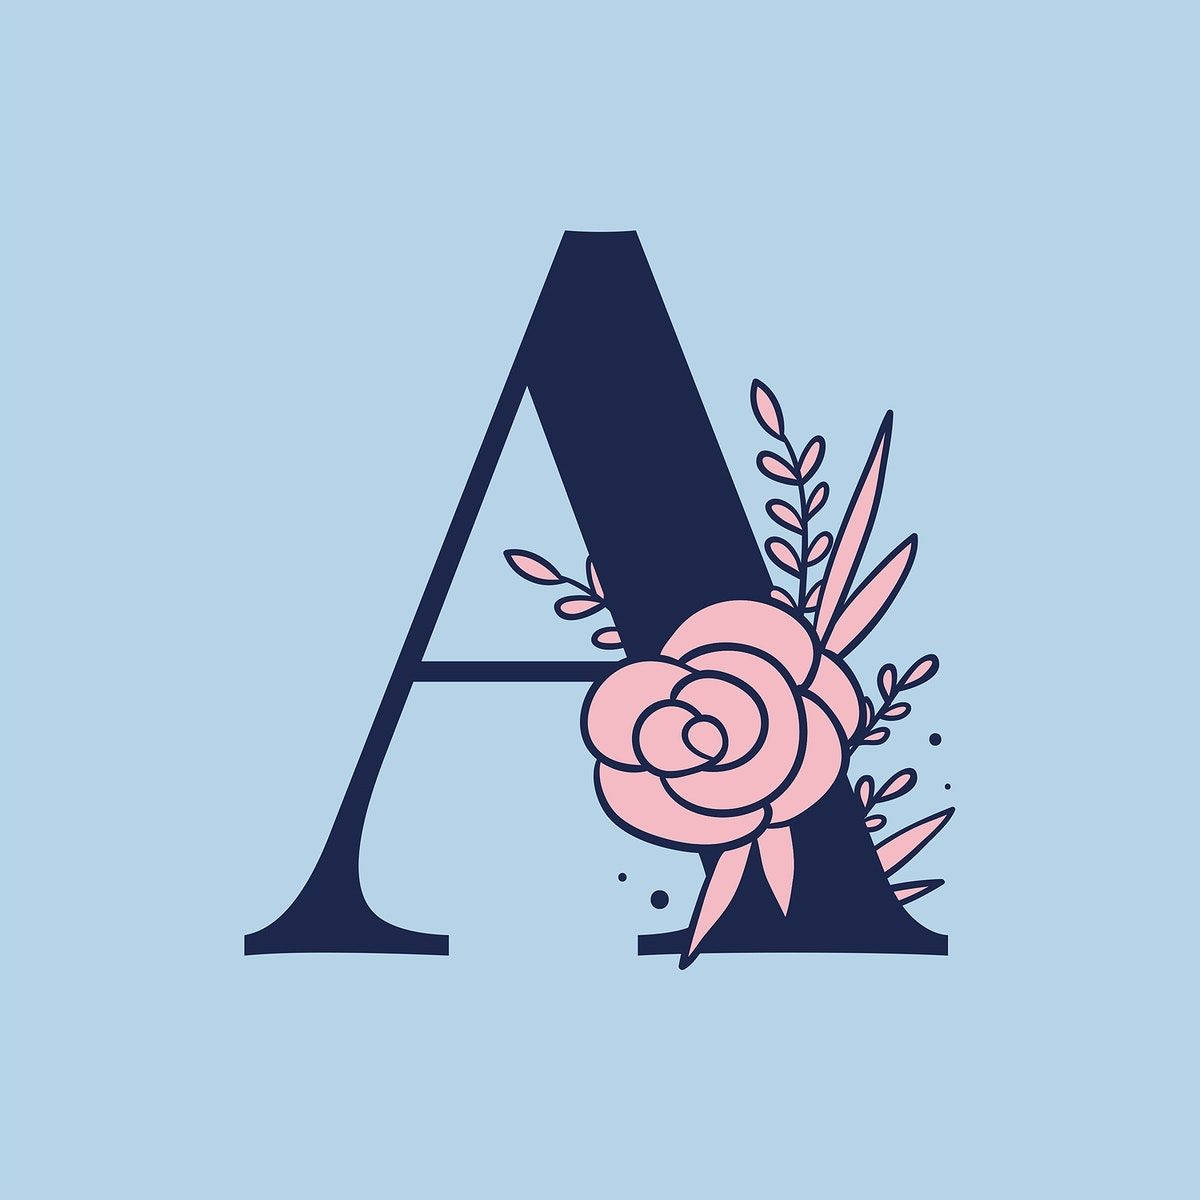 Blue Capital Alphabet Letter A With Pink Flower